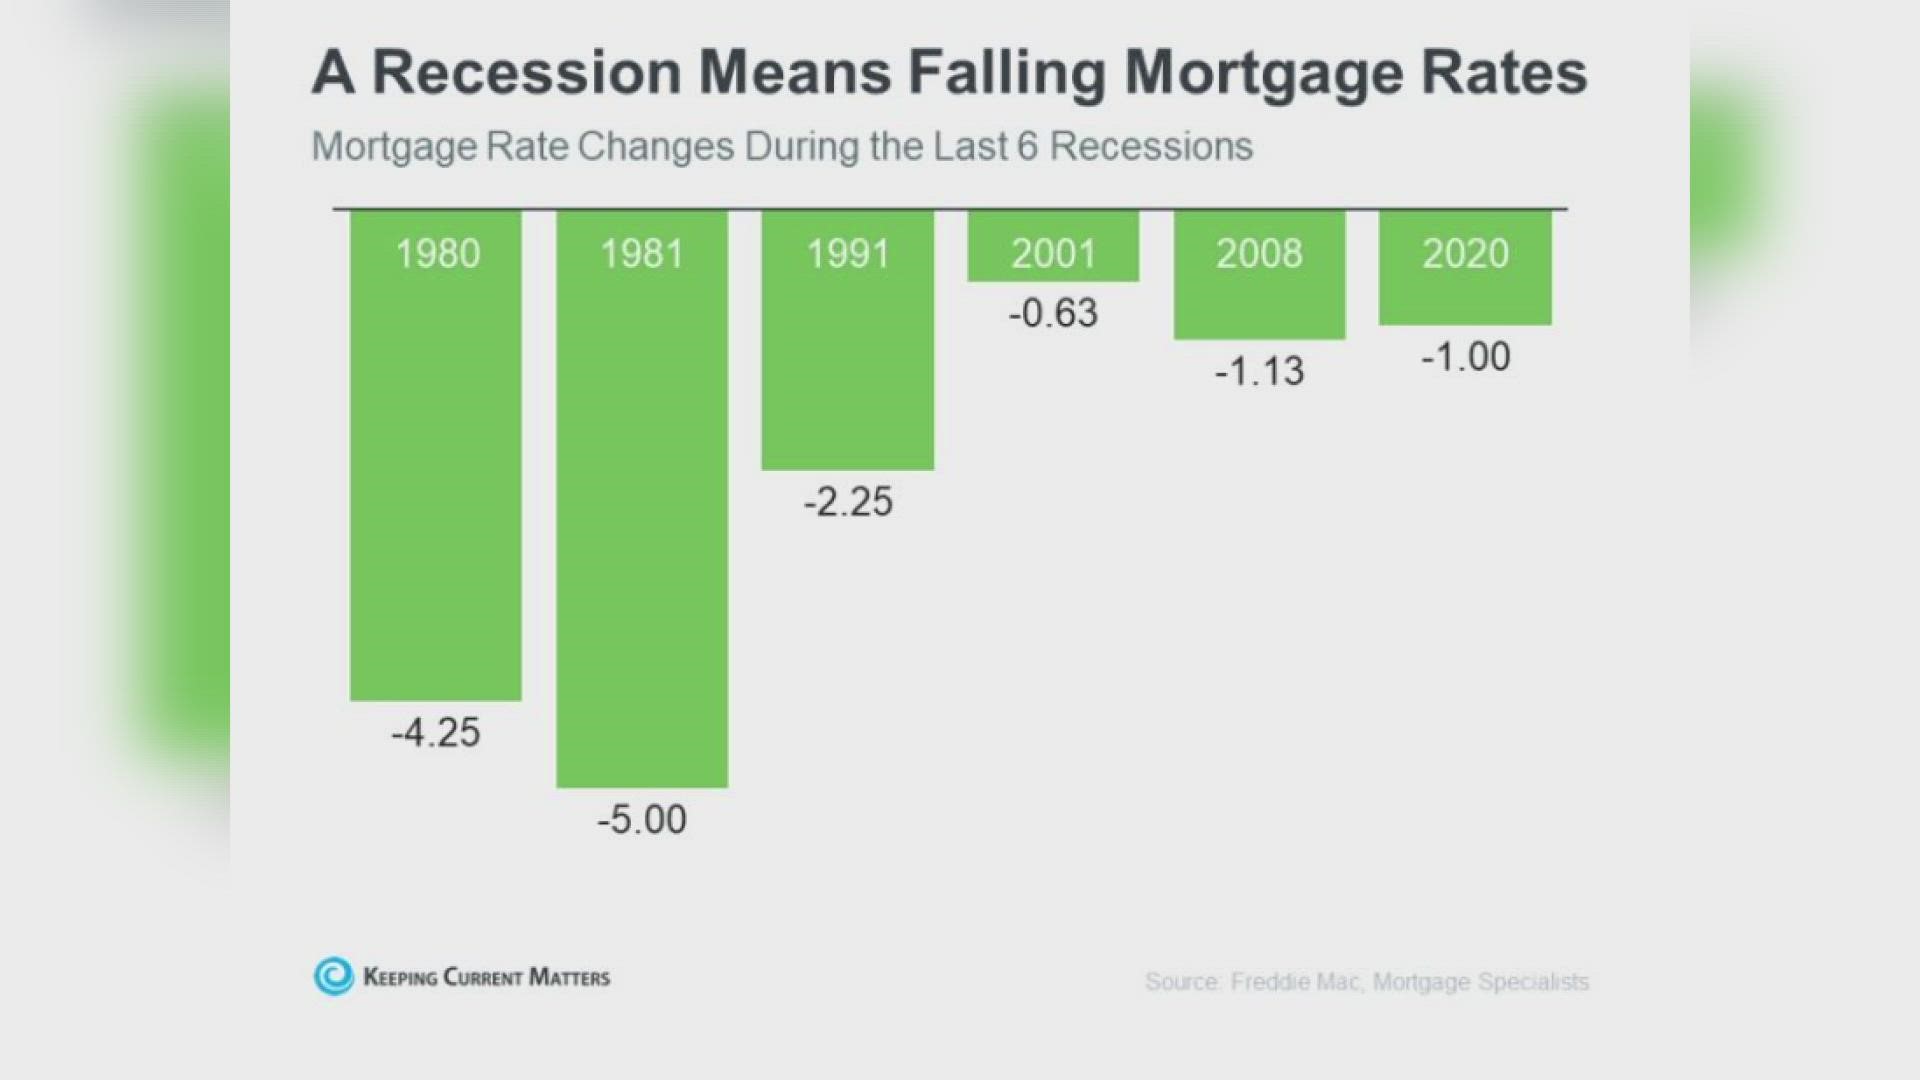 Continued talks of a possible recession this year is leading to more questions about the housing market. Real estate expert Lane Lyon takes a closer look.